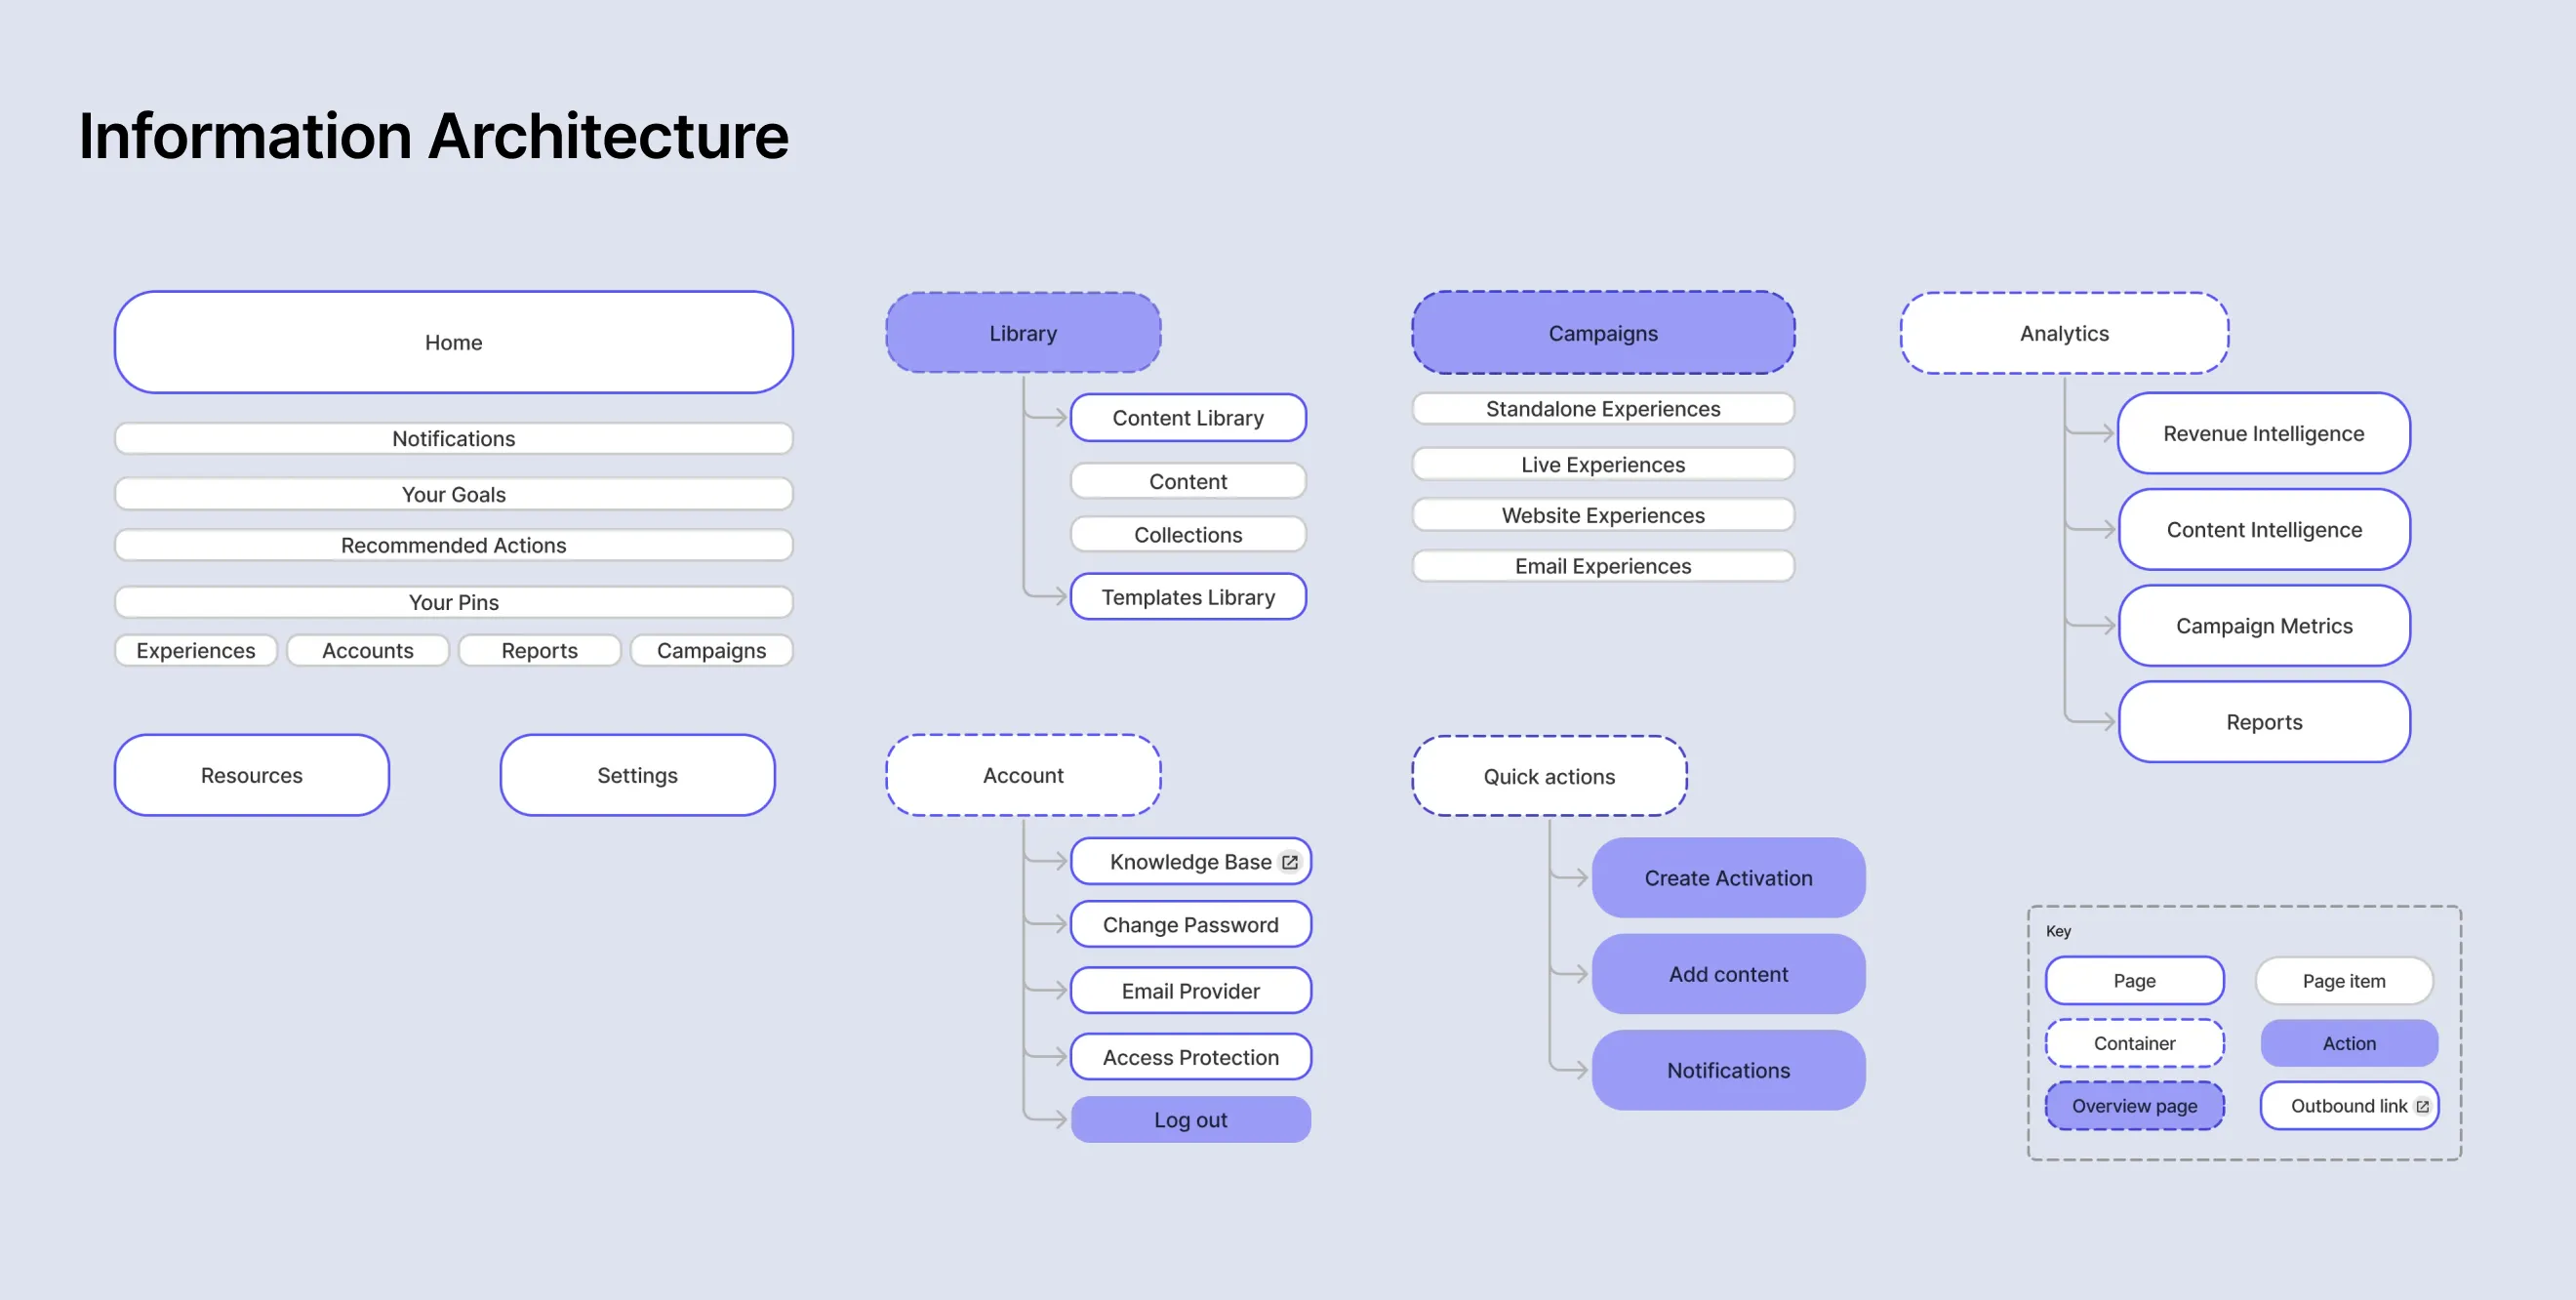 sam-small-design-case-study-pathfactory-reimagining-information-architecture-overview-v01